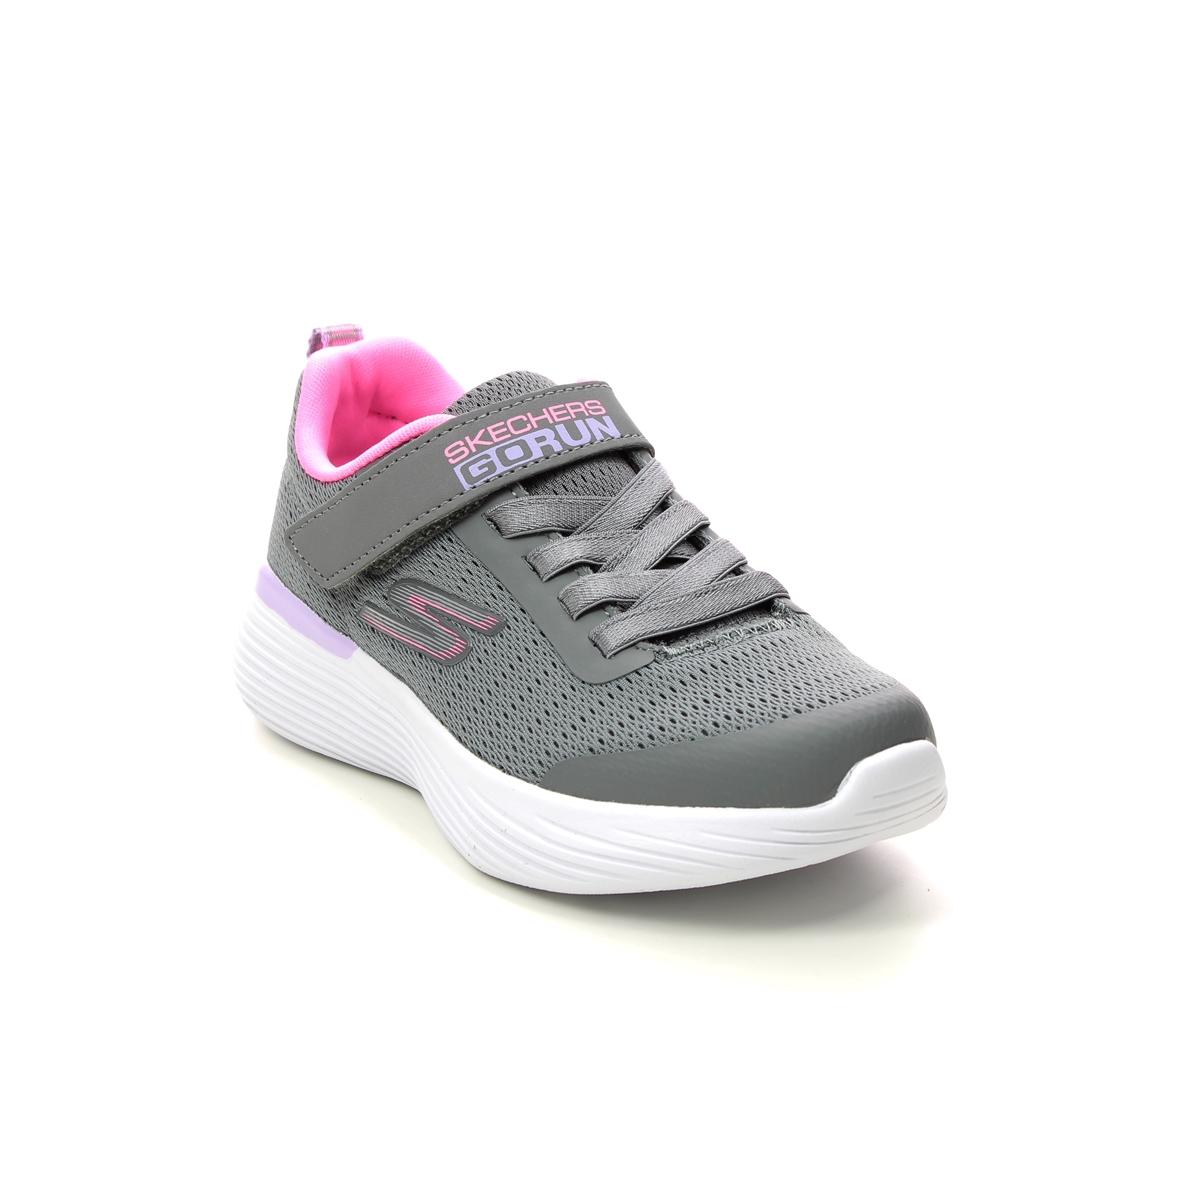 Skechers Go Run 400 Bungee CCPK Charcoal Kids girls trainers 302427L in a Plain Textile in Size 27